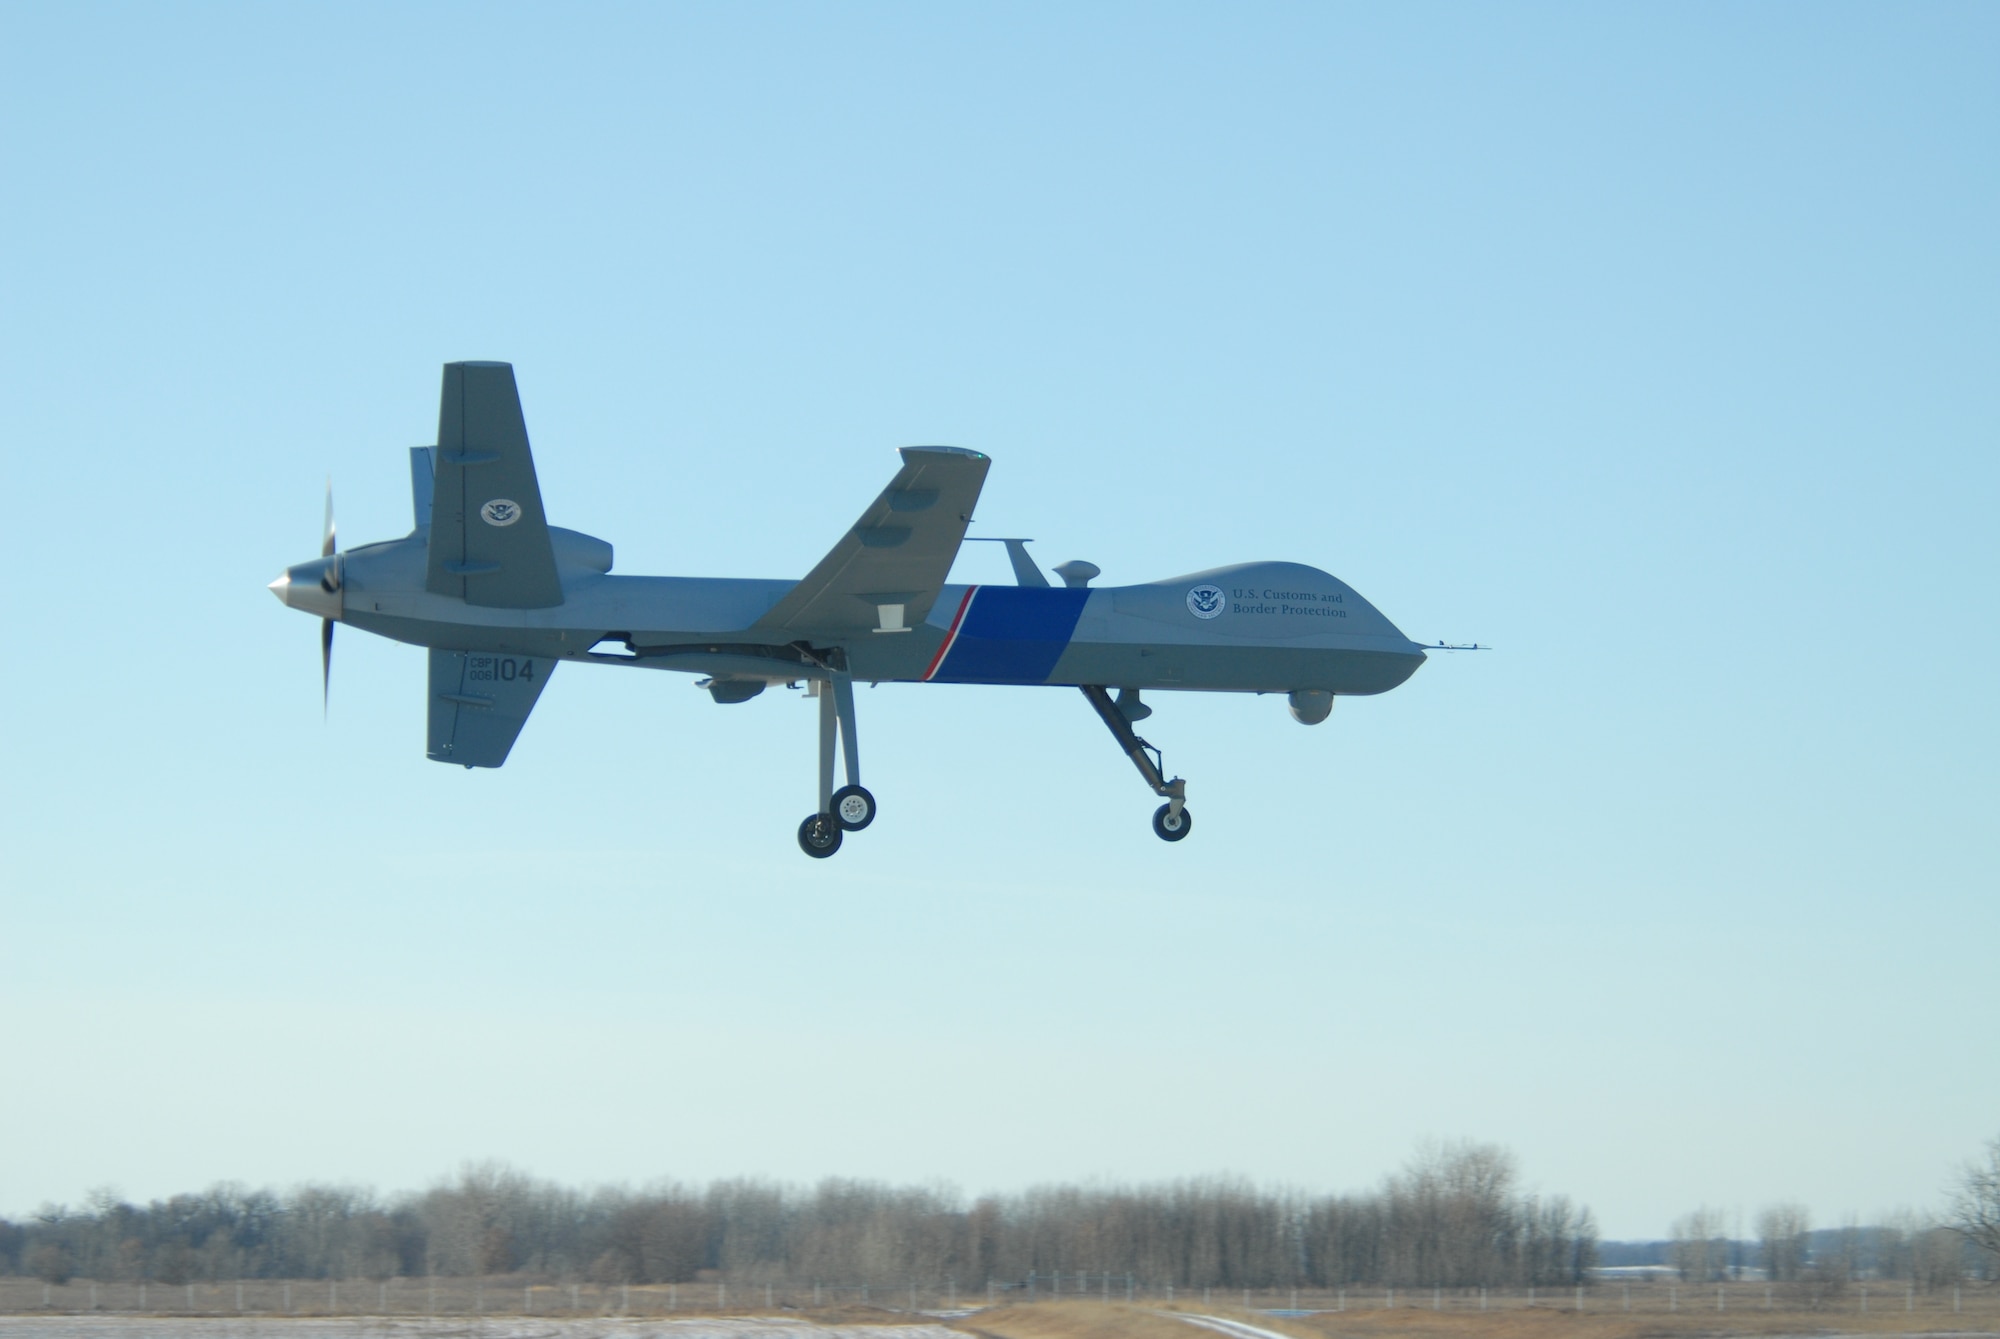 The first Predator B Unmanned Aircraft System on the northern border flies into Grand Forks Air Force Base on Dec. 6. This system – in use since 2005 on the southwest border – will enhance border security efforts and support Customs and Border Patrol personnel on the ground along the northern border with Canada. (U.S. Air National Guard photo by Senior Master Sgt. David Lipp)